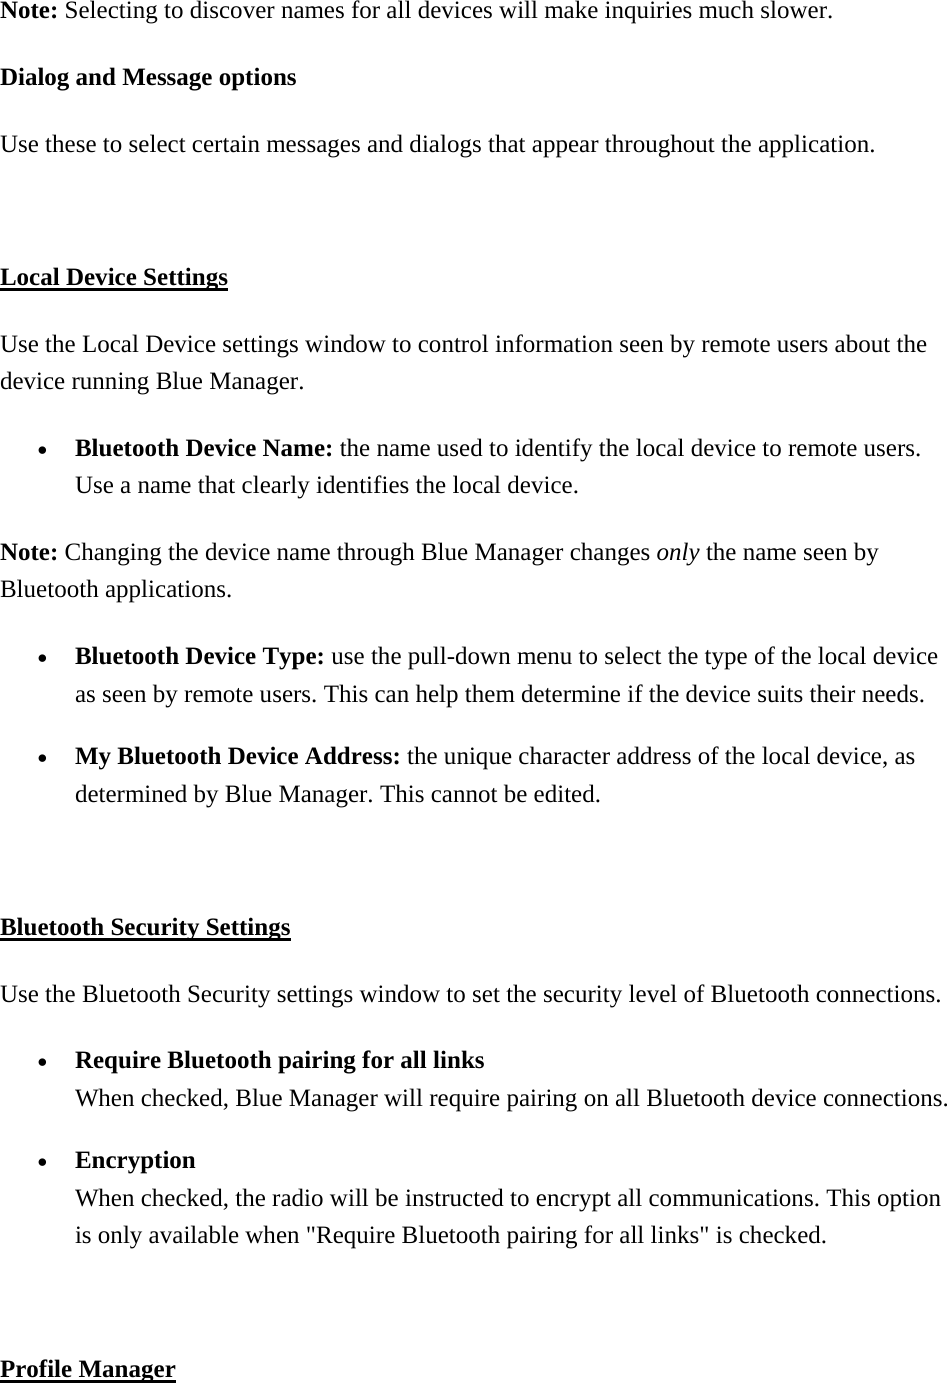 Note: Selecting to discover names for all devices will make inquiries much slower. Dialog and Message options Use these to select certain messages and dialogs that appear throughout the application.  Local Device Settings Use the Local Device settings window to control information seen by remote users about the device running Blue Manager.   •  Bluetooth Device Name: the name used to identify the local device to remote users. Use a name that clearly identifies the local device.   Note: Changing the device name through Blue Manager changes only the name seen by Bluetooth applications.   •  Bluetooth Device Type: use the pull-down menu to select the type of the local device as seen by remote users. This can help them determine if the device suits their needs. •  My Bluetooth Device Address: the unique character address of the local device, as determined by Blue Manager. This cannot be edited.    Bluetooth Security Settings Use the Bluetooth Security settings window to set the security level of Bluetooth connections.   •  Require Bluetooth pairing for all links When checked, Blue Manager will require pairing on all Bluetooth device connections. •  Encryption When checked, the radio will be instructed to encrypt all communications. This option is only available when &quot;Require Bluetooth pairing for all links&quot; is checked.  Profile Manager 